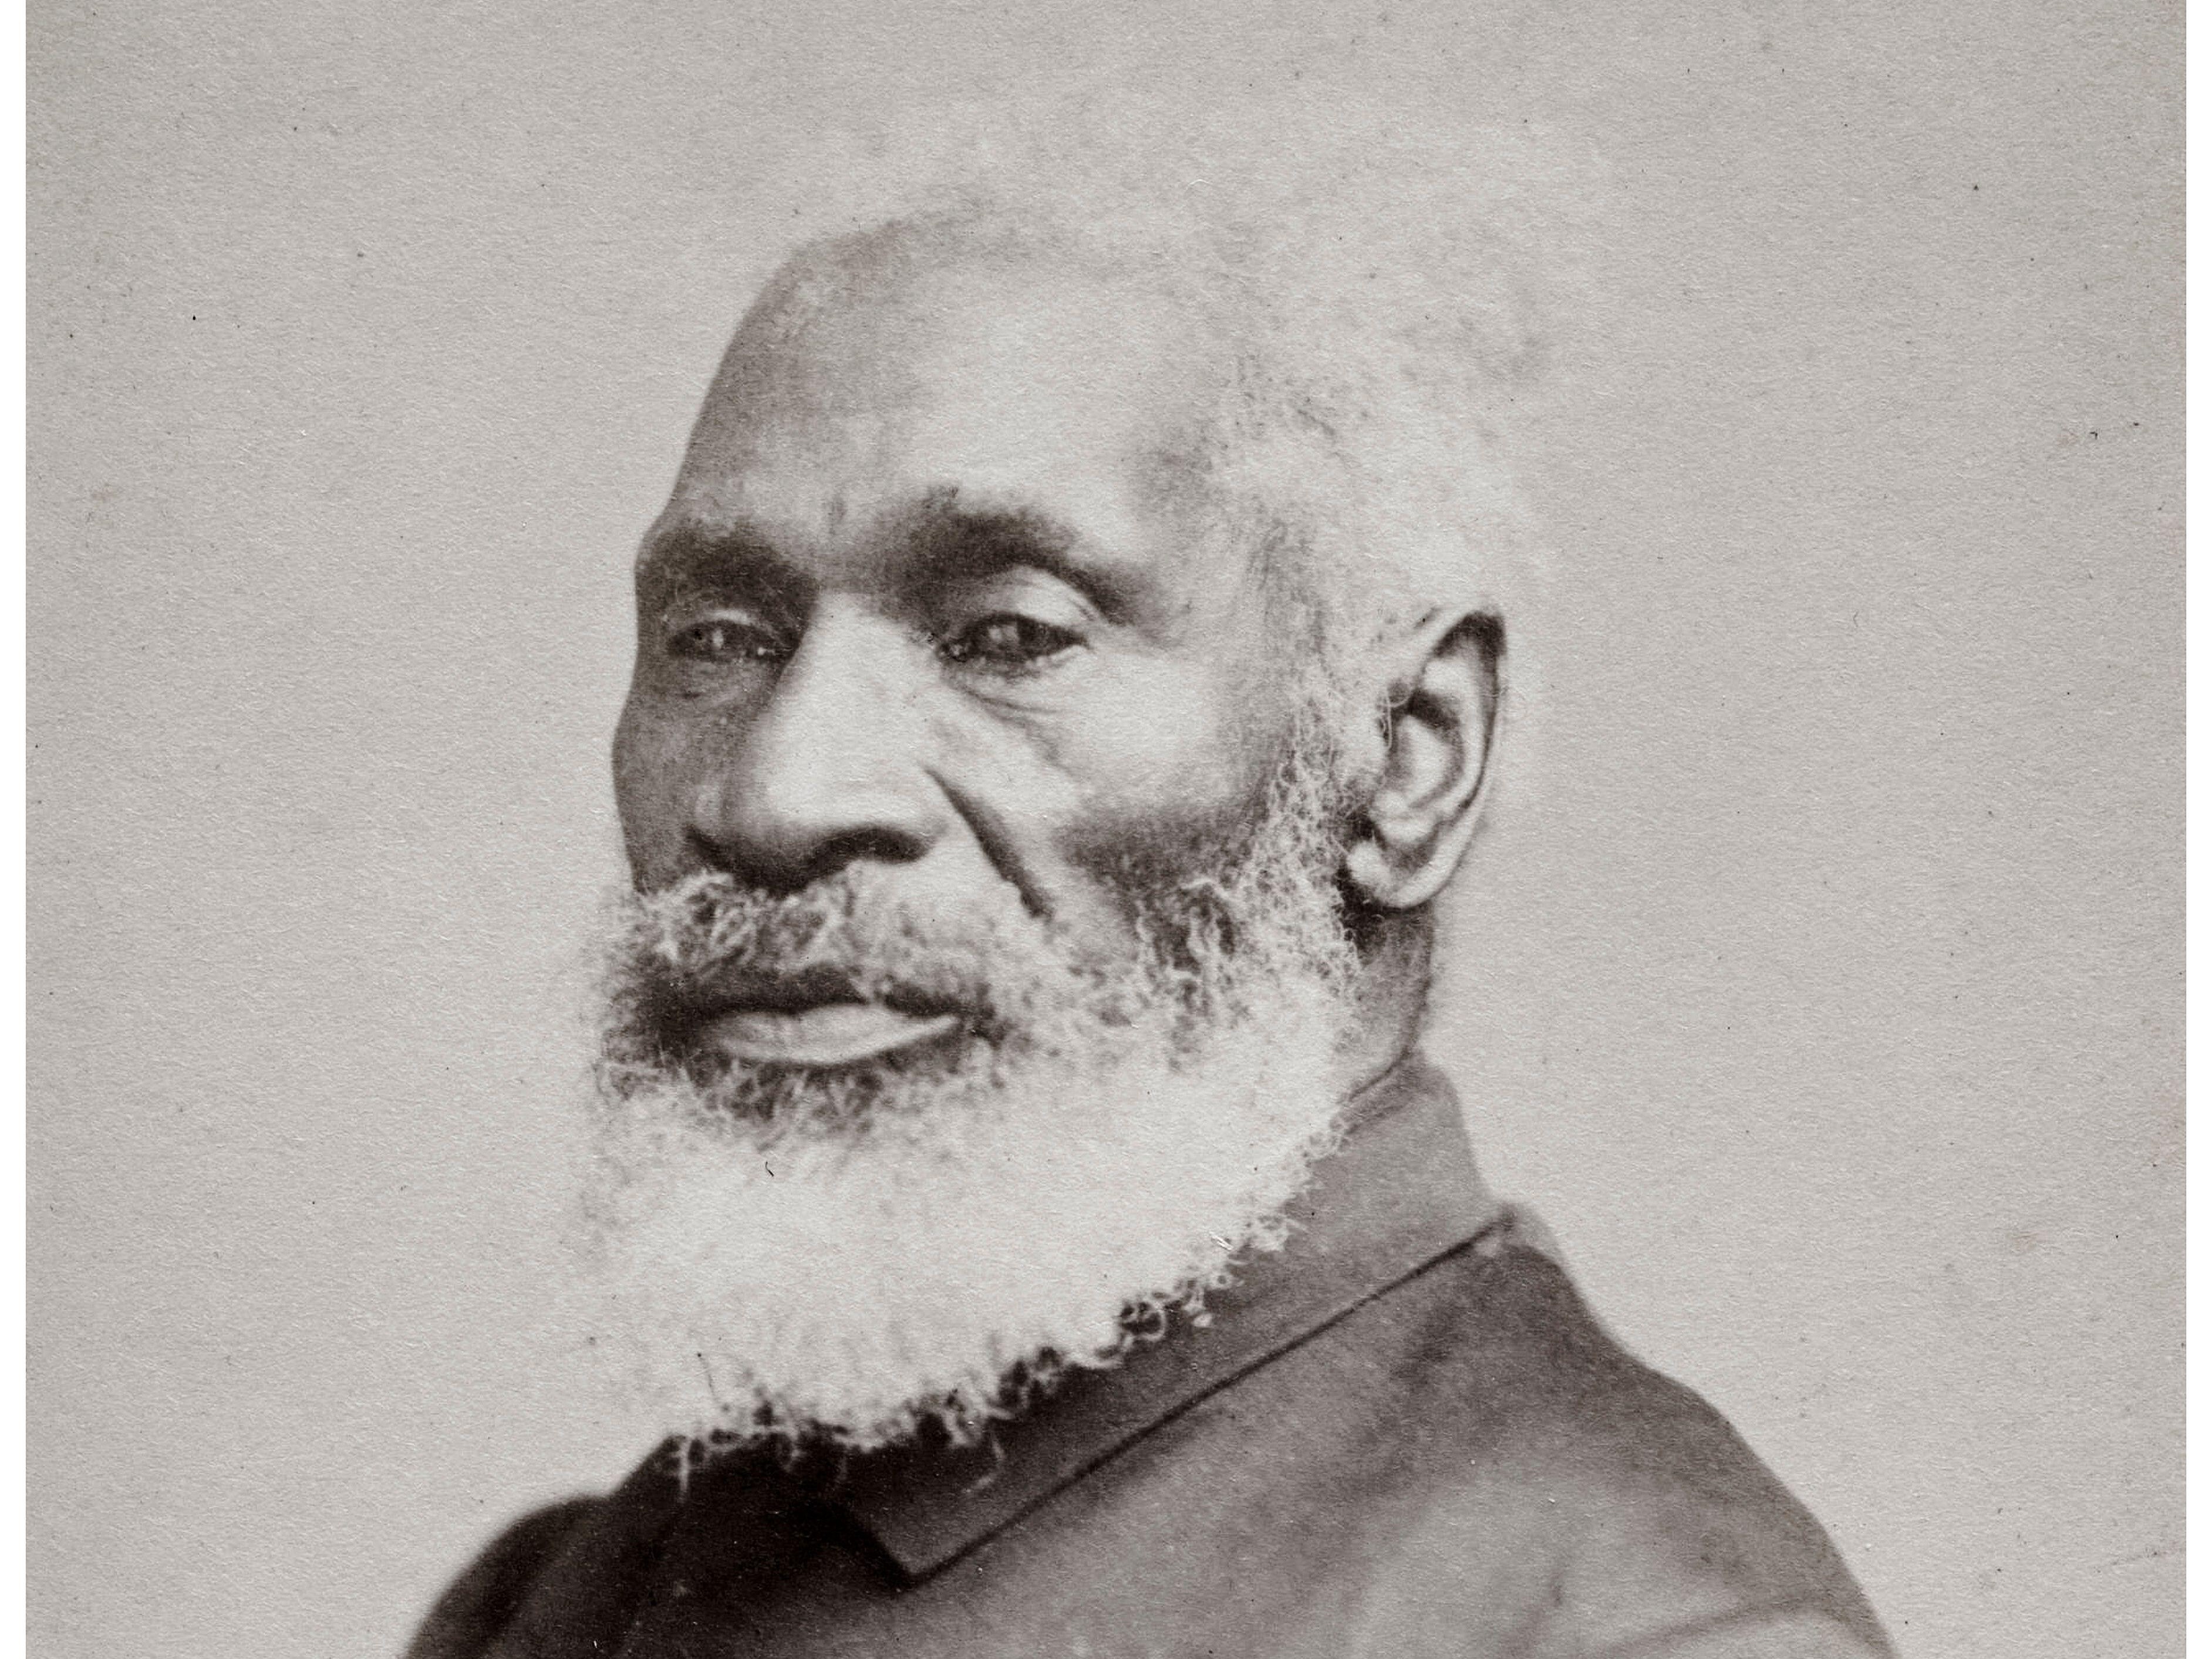 Josiah Henson (born June 15, 1789, in Maryland and died May 5, 1883, Dresden, Ontario)